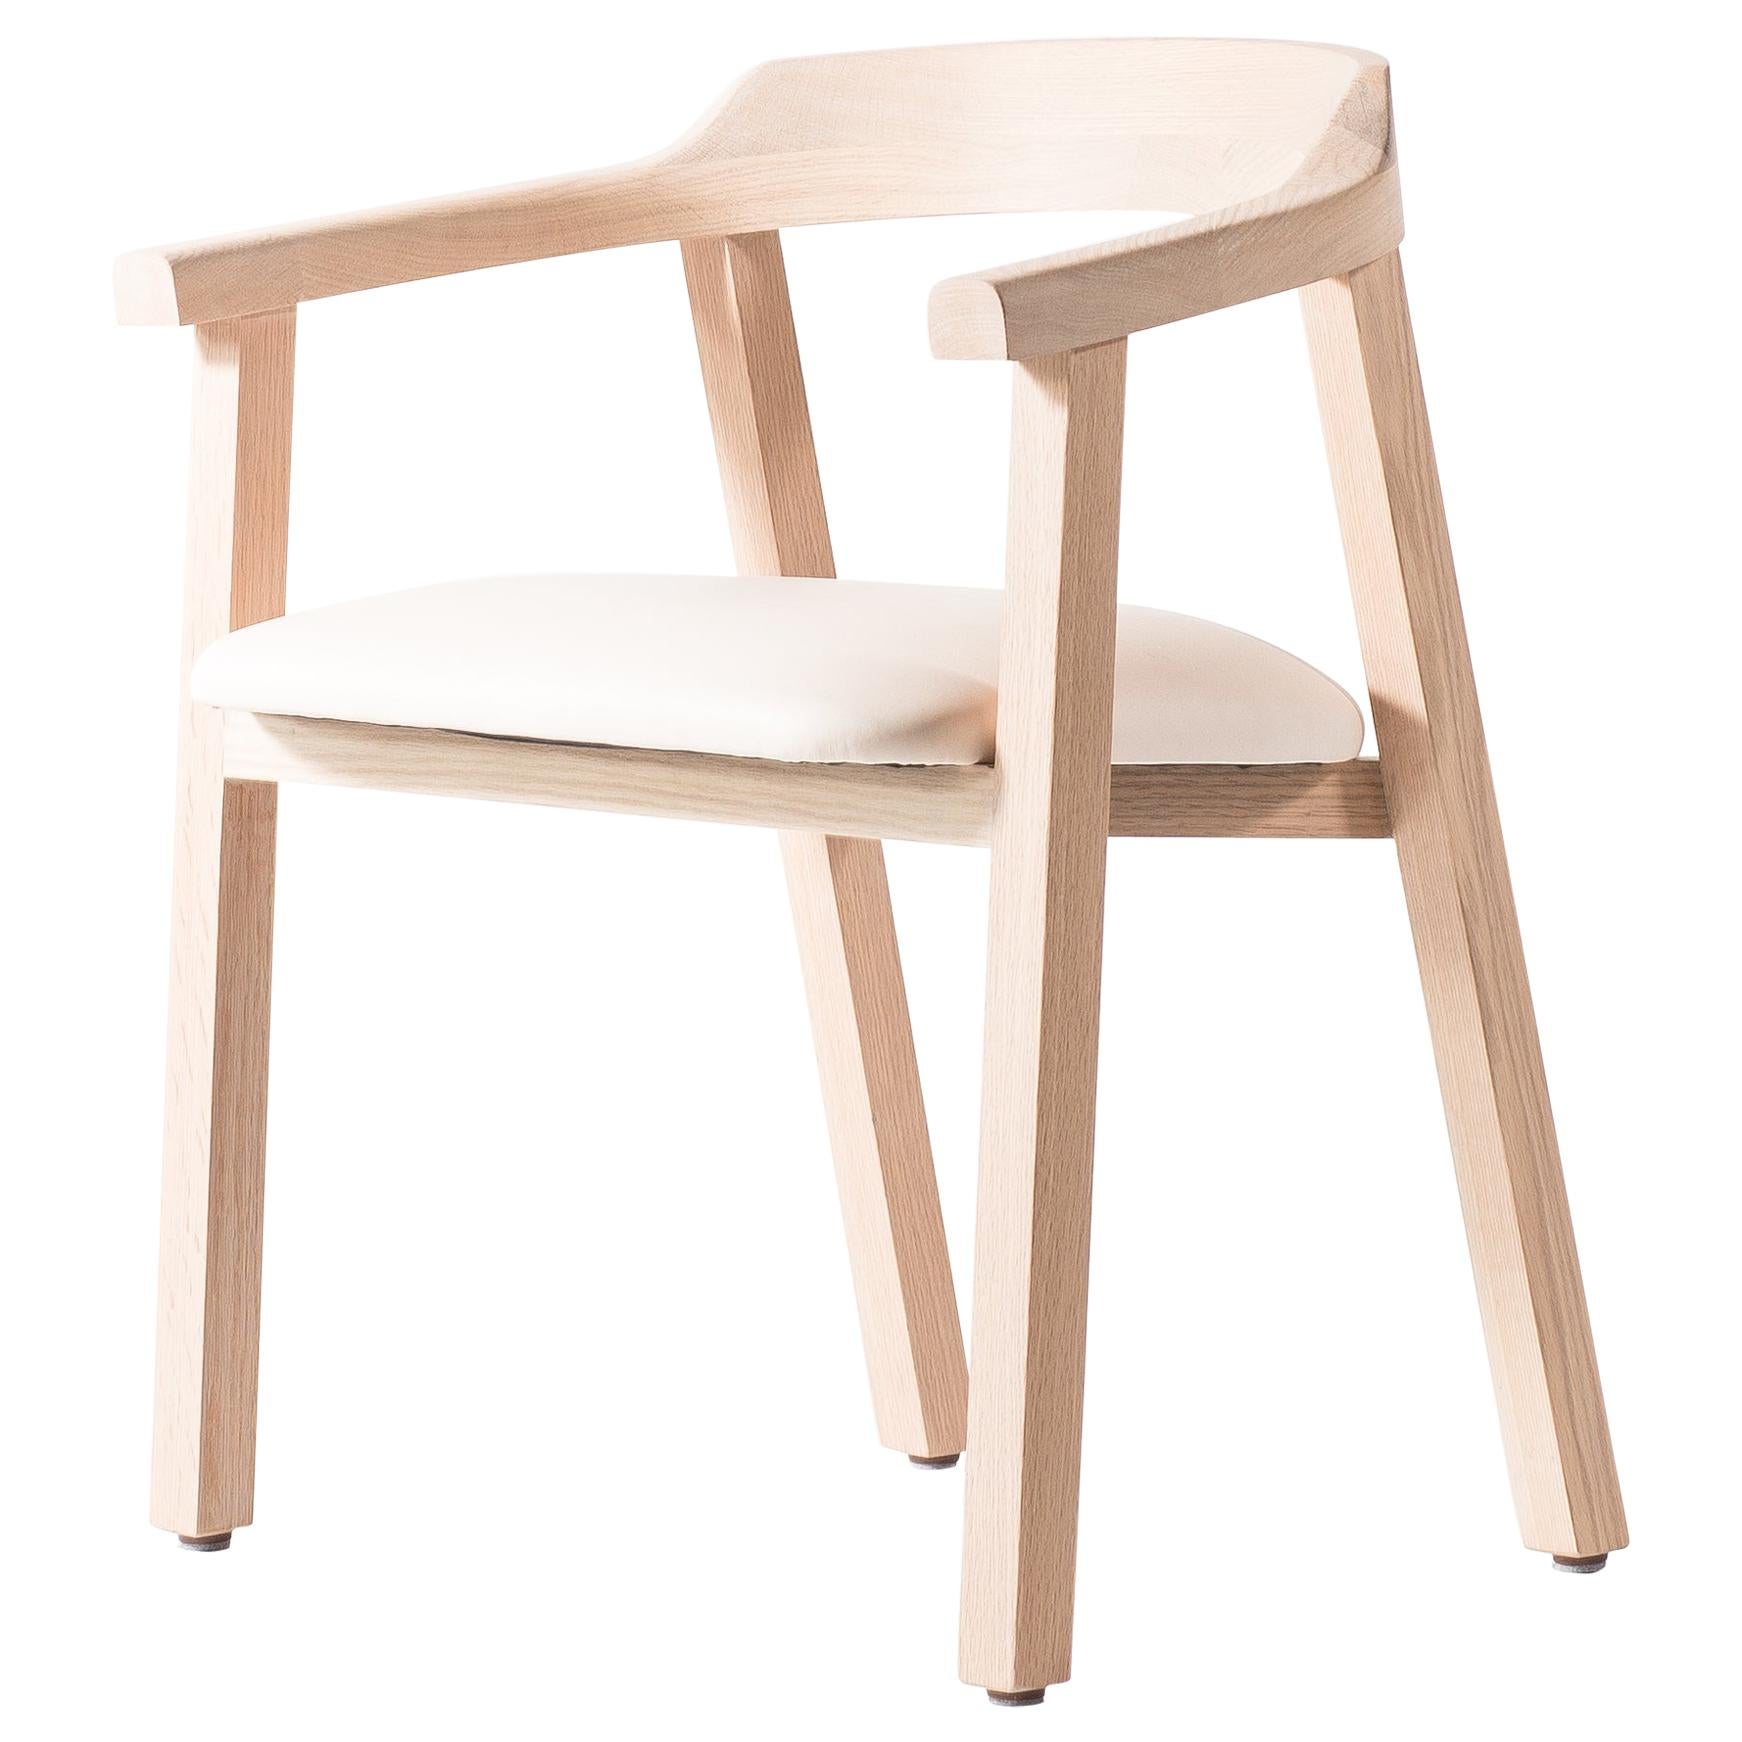 White Oak Dining Chair with Leather Seat or Dining Chair GH2 For Sale